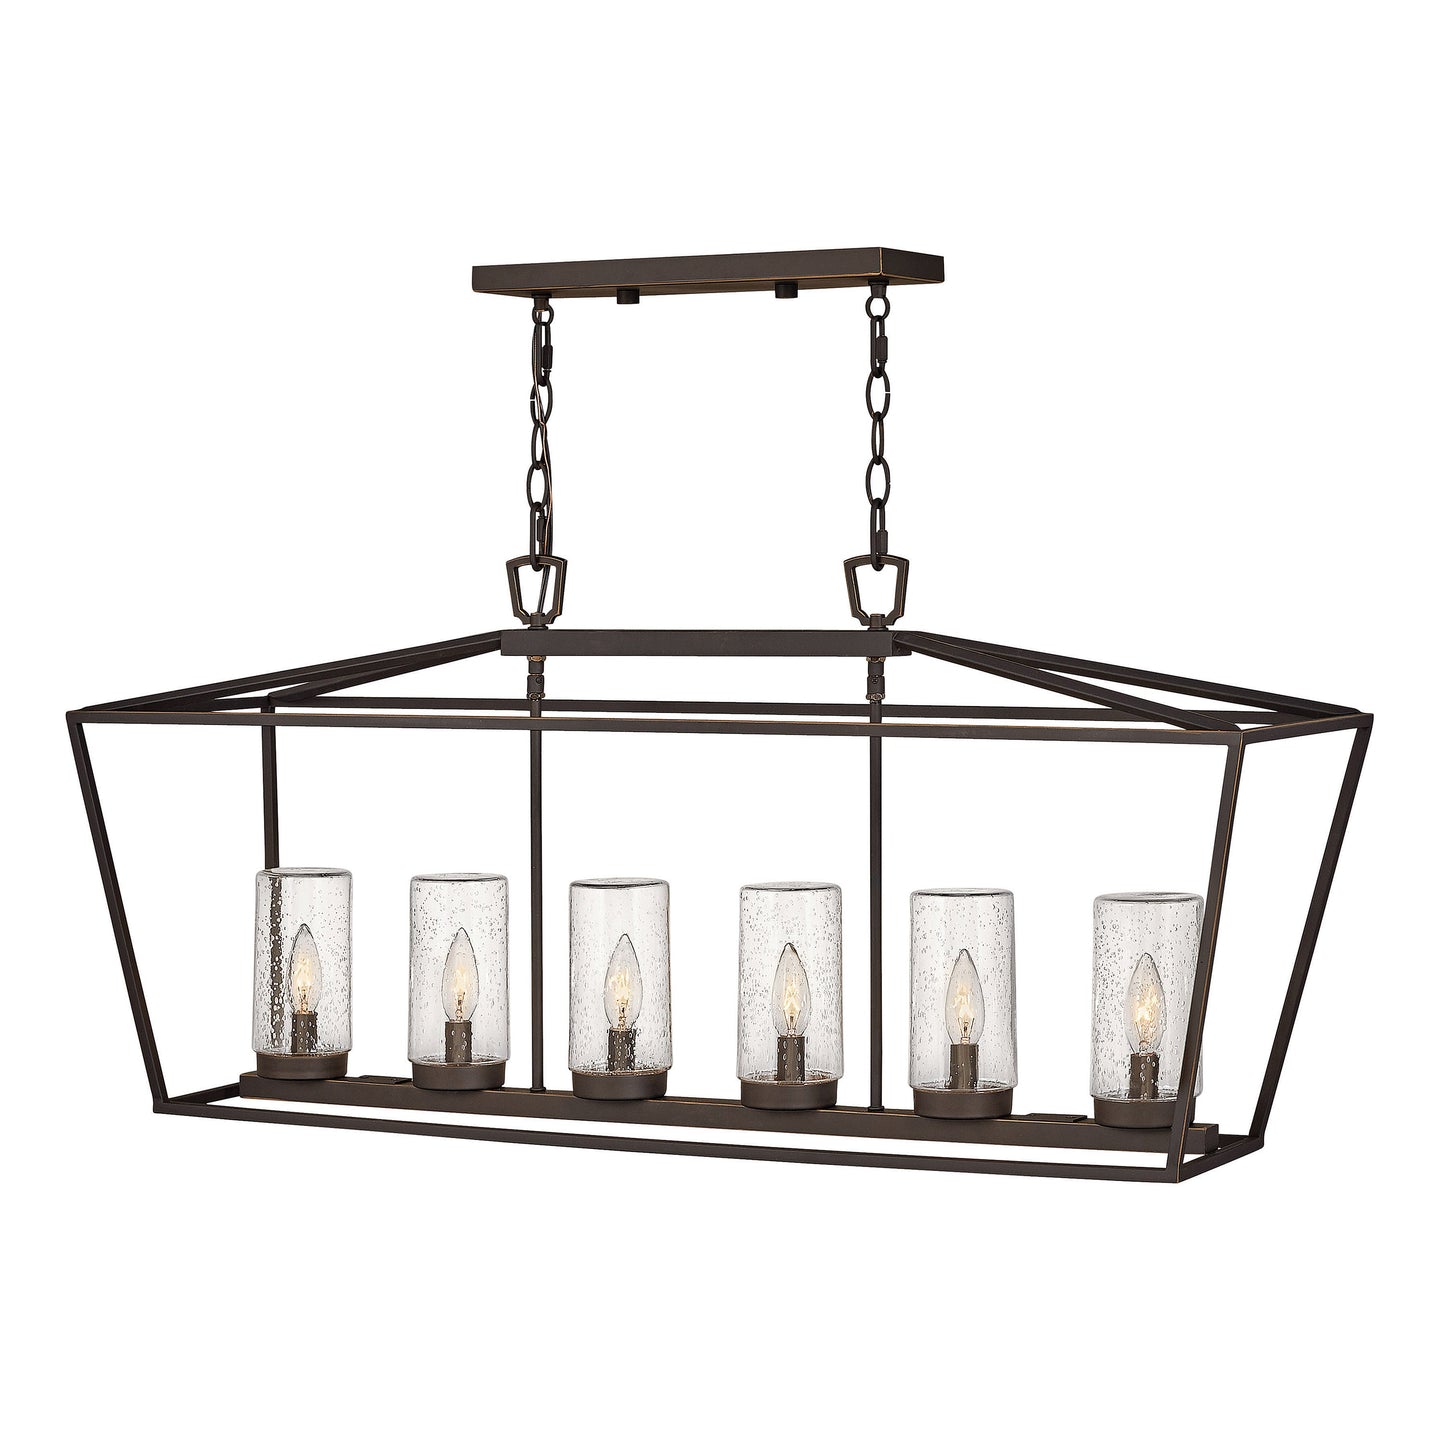 Alford Place 6-Light Outdoor Pendant Light